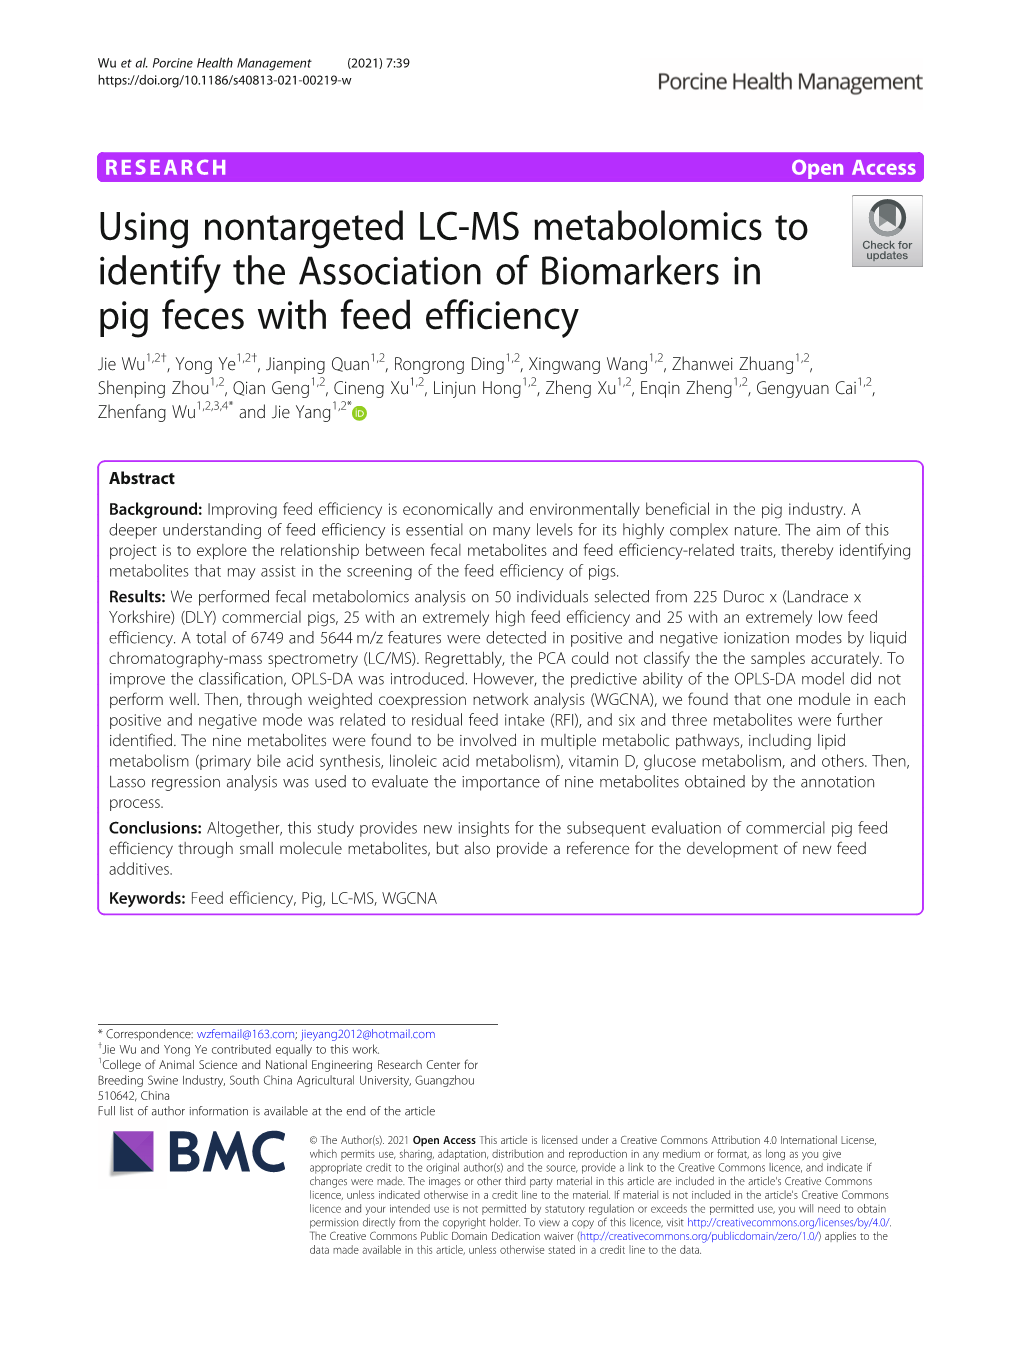 Using Nontargeted LC-MS Metabolomics to Identify The